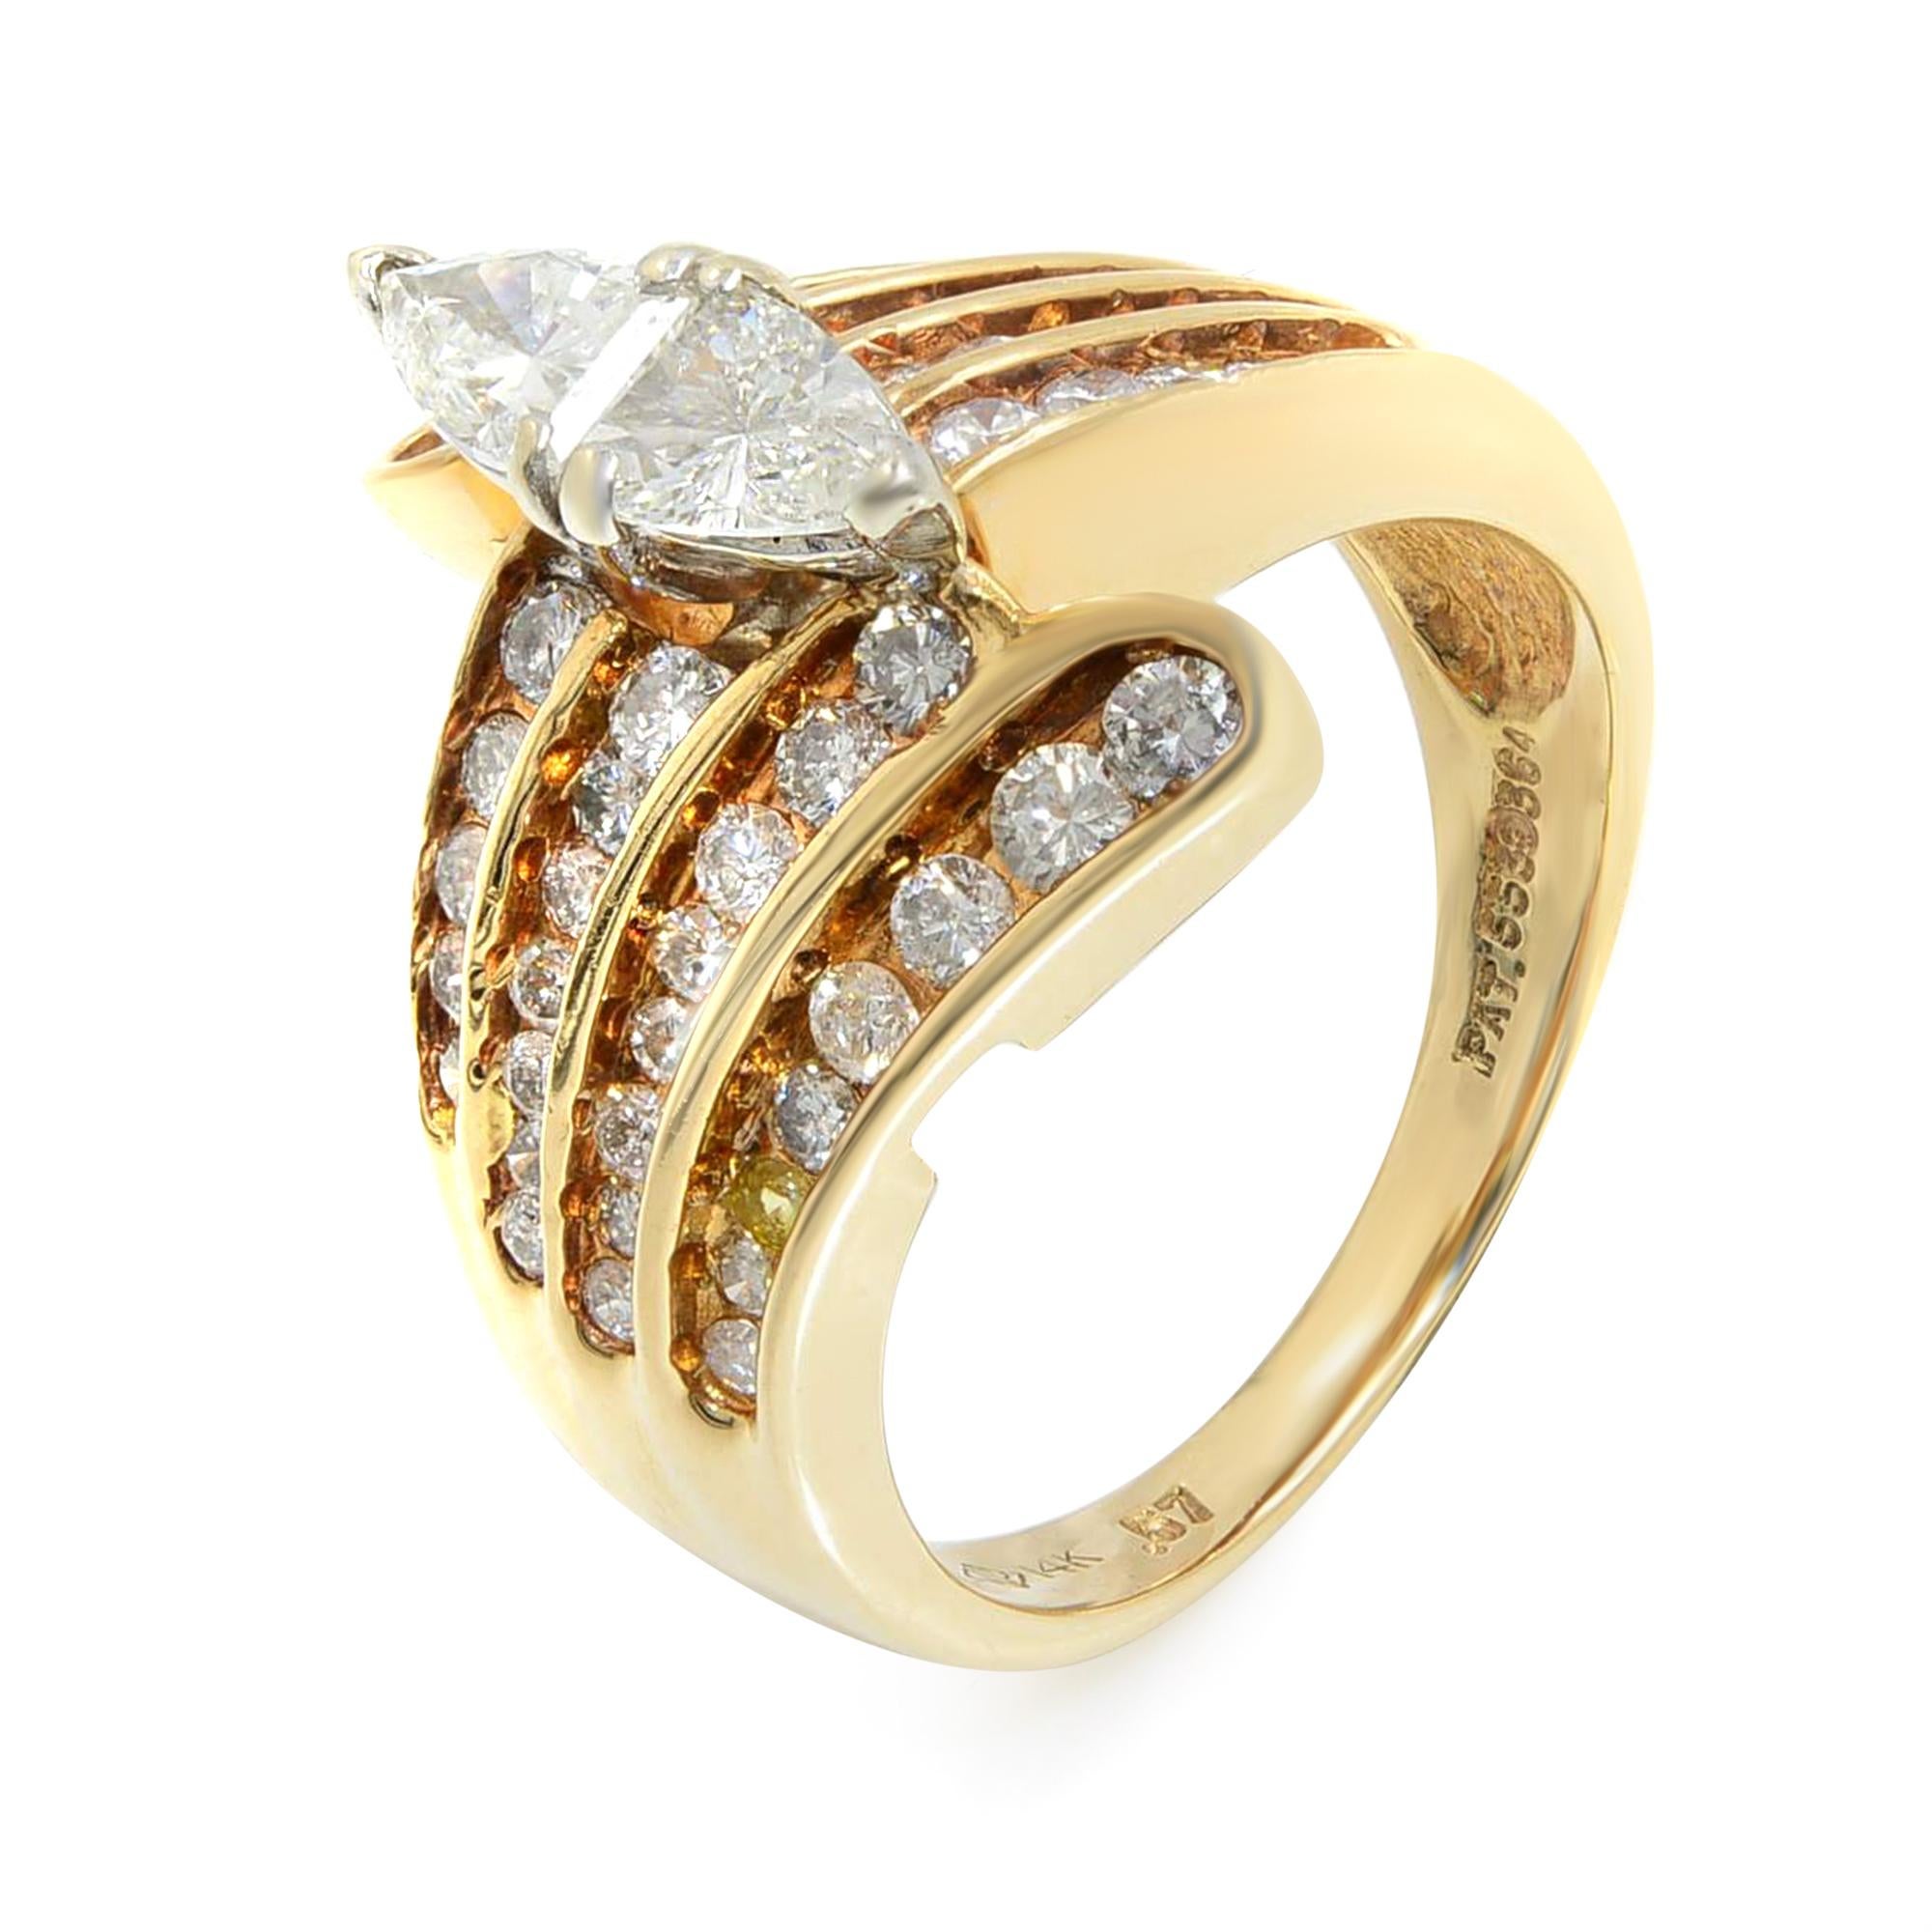 This gorgeous ring features a Marquise Illusion center diamond setting. The ring is accented with 4 rows of round cut diamonds on each side in channel setting. Crafted in high polished 14K Yellow Gold. Center marquise illusion is combined from 2